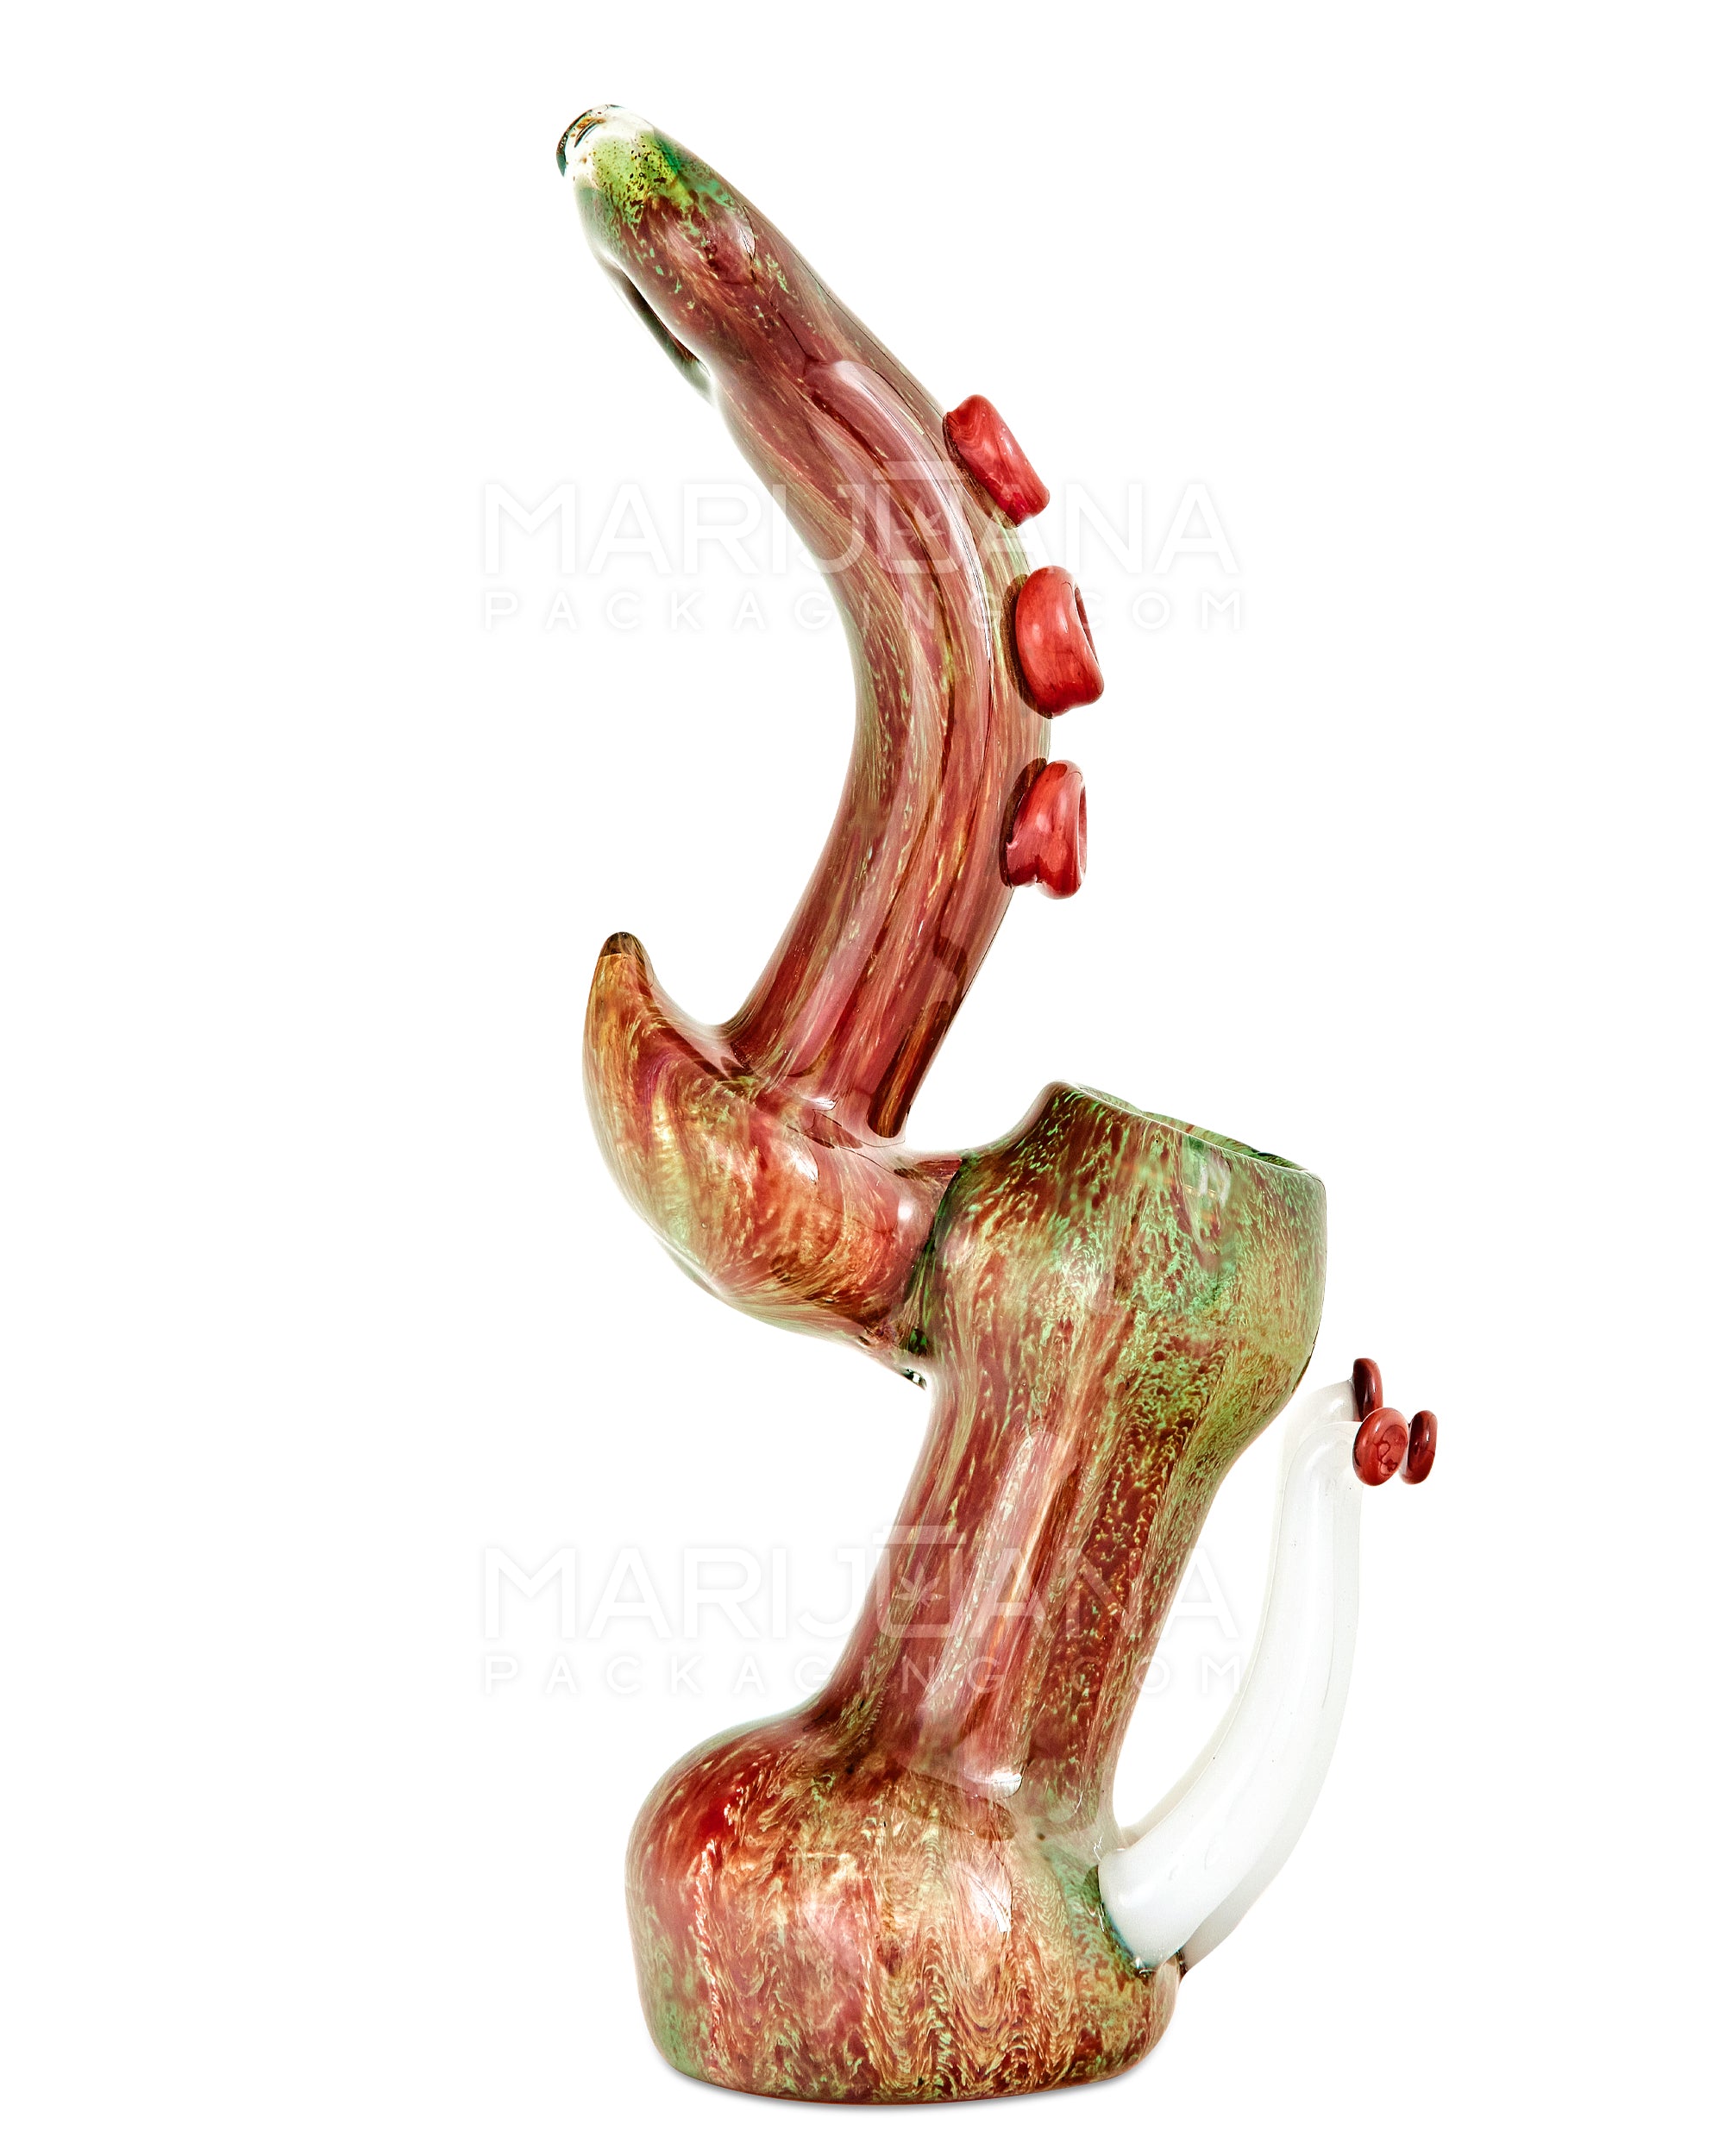 Heady | Donut Mouth Color Pull Kraken Bubbler w/ Triple Tentacles | 9in Tall - Glass - Red & Green - 2